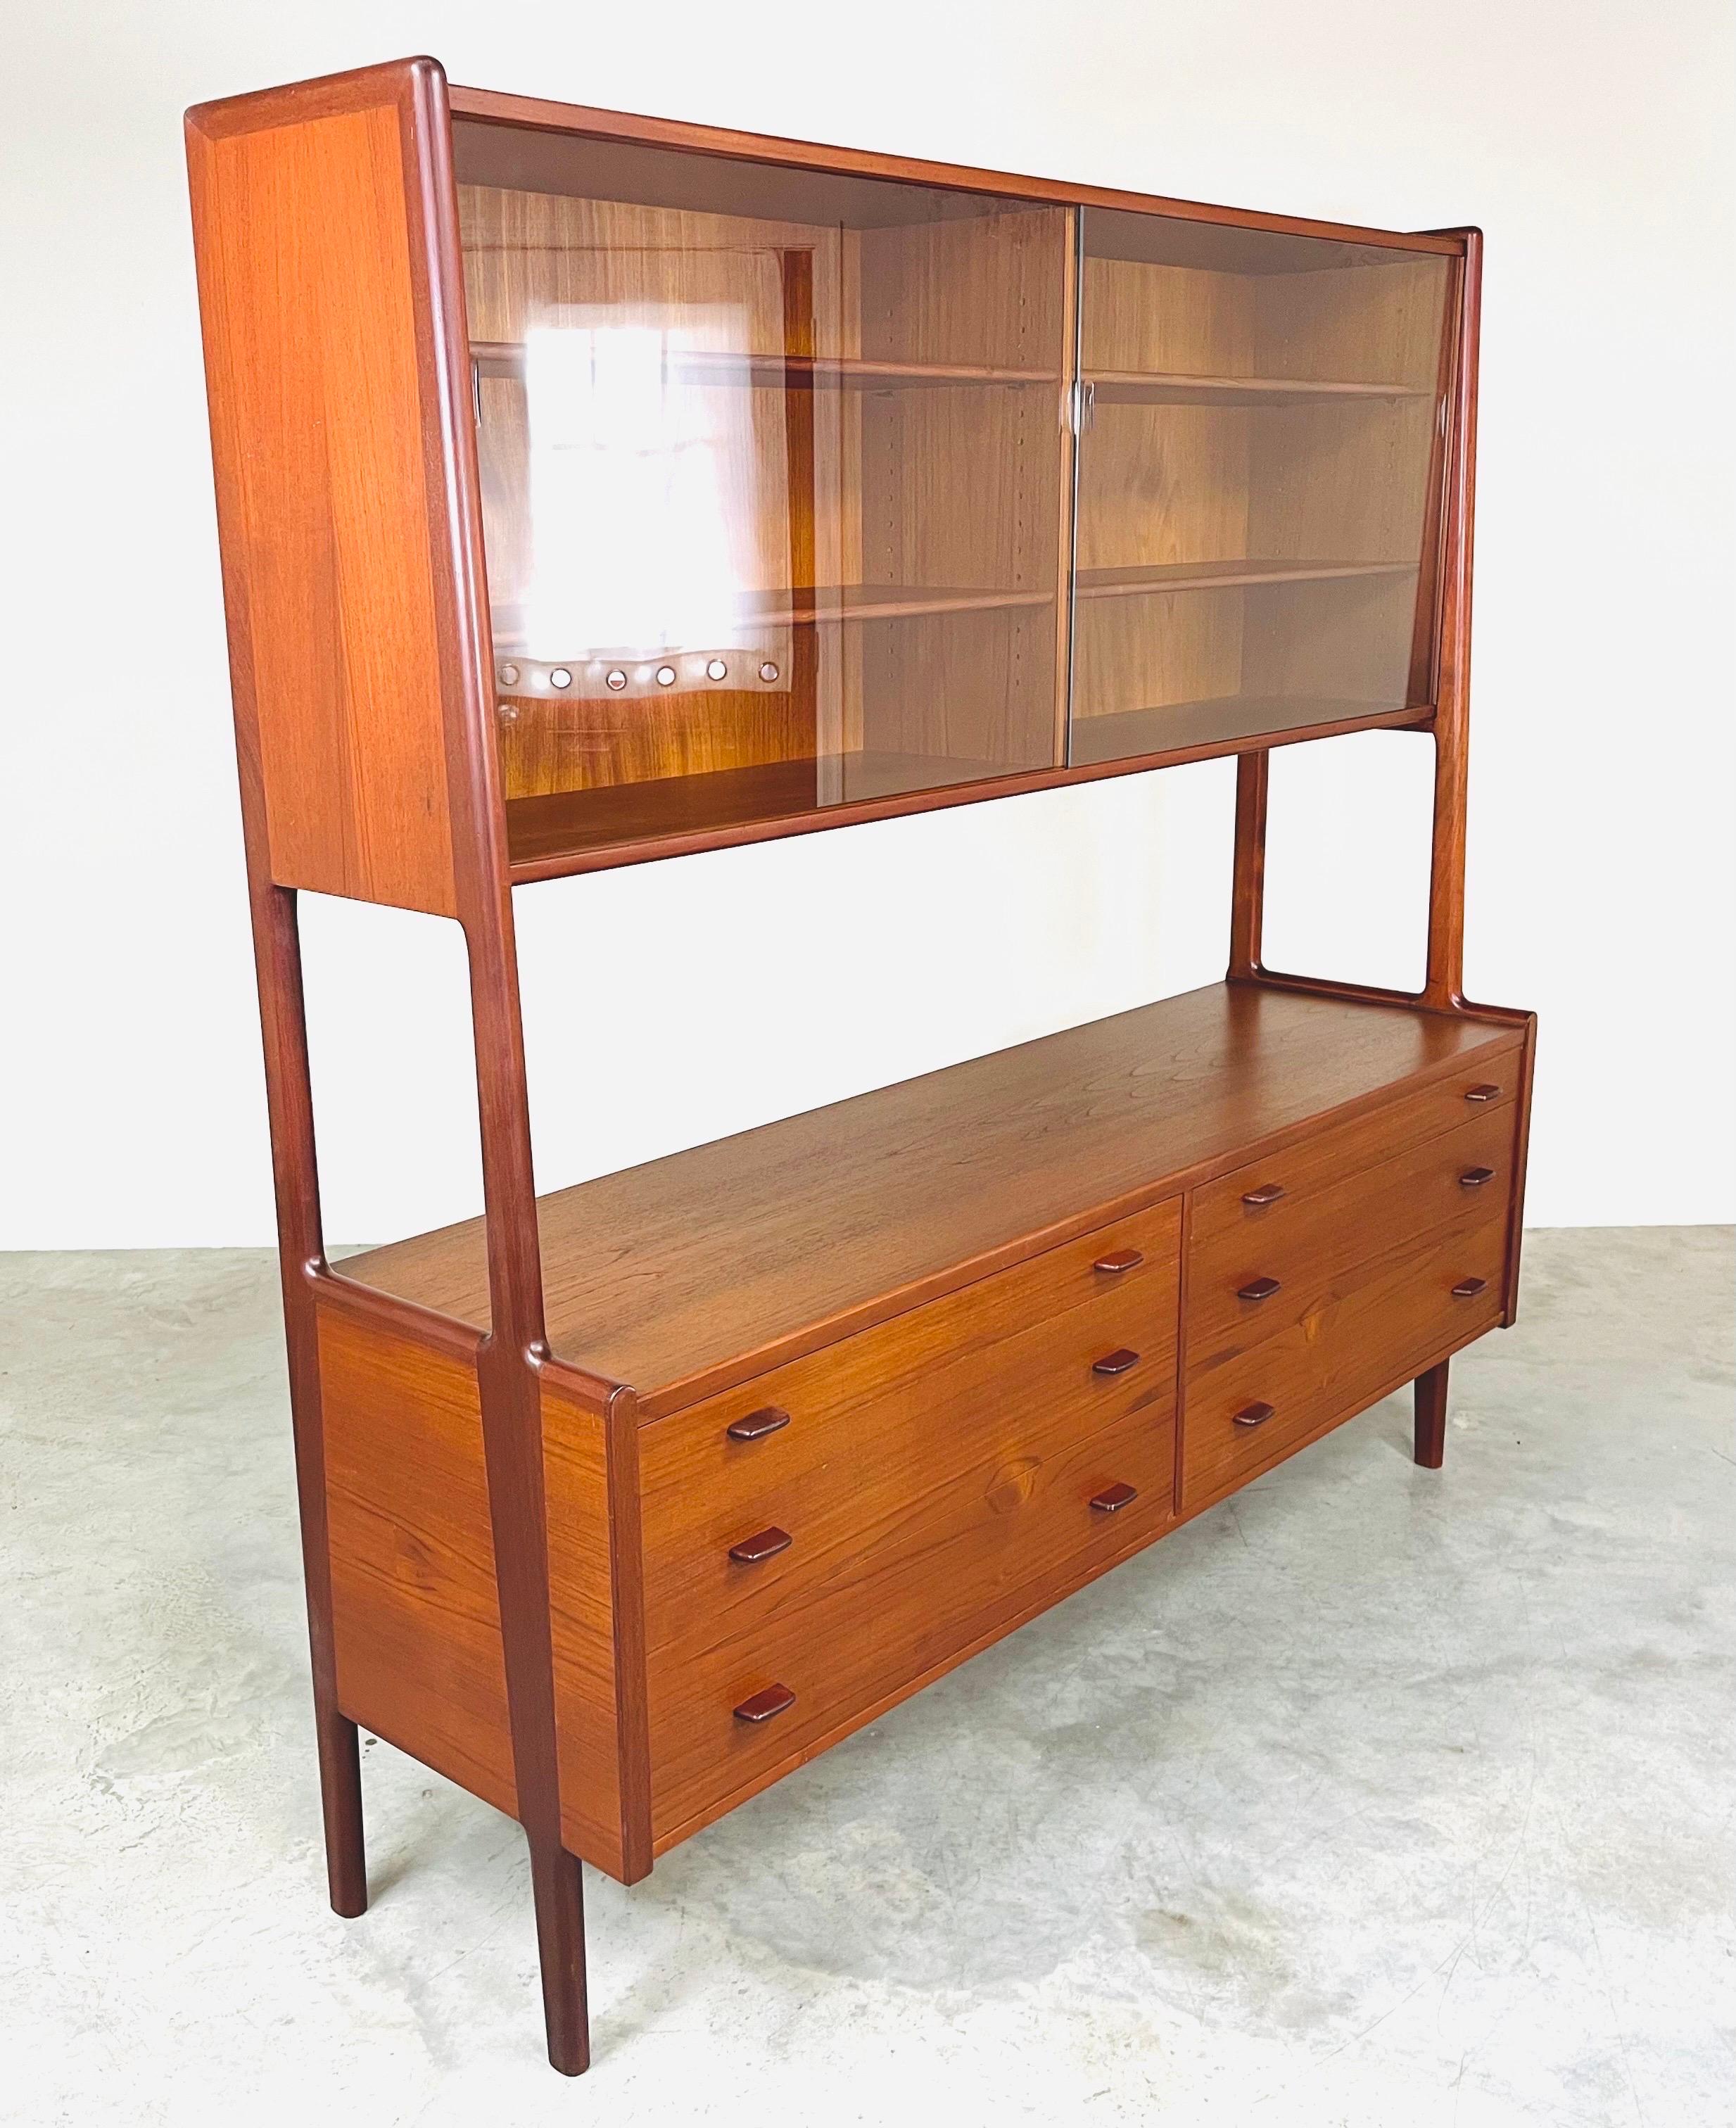 A sculptural teak Danish Modern credenza having top hutch that is connected by solid teak legs that run from floor to top designed by Hans Wegner circa 1957. This cabinet features 6 drawers with book matched fronts and 4 shelves that rest behind